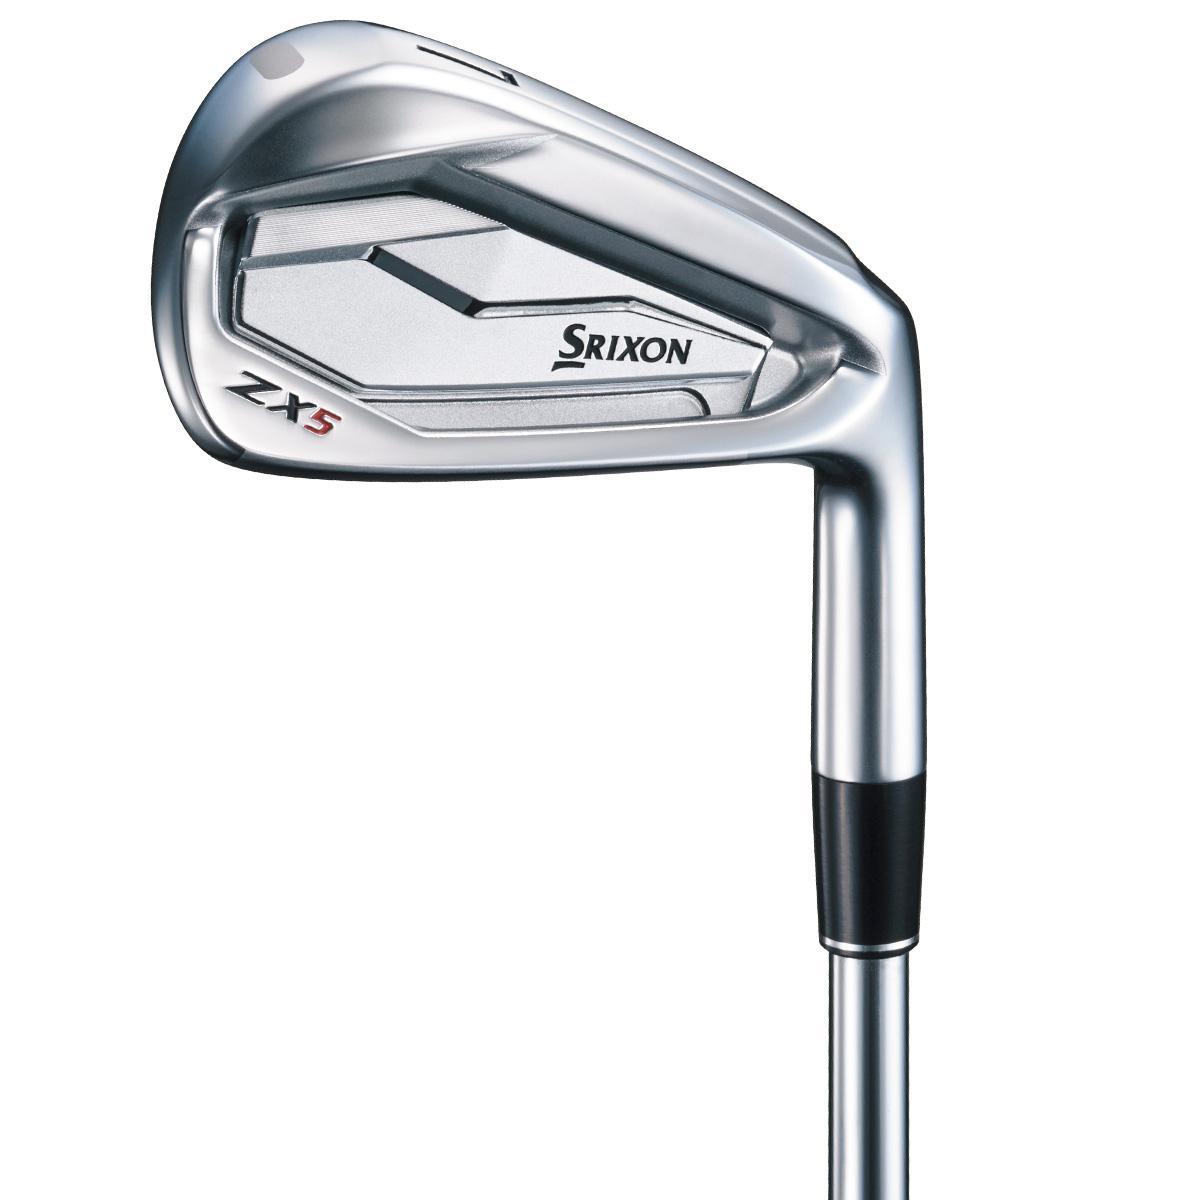 DUNLOP SRIXON ZX5 アイアンセット 6本［N.S.PRO 950GH DST］（S） SRIXON ZX（スリクソン） アイアンセットの商品画像